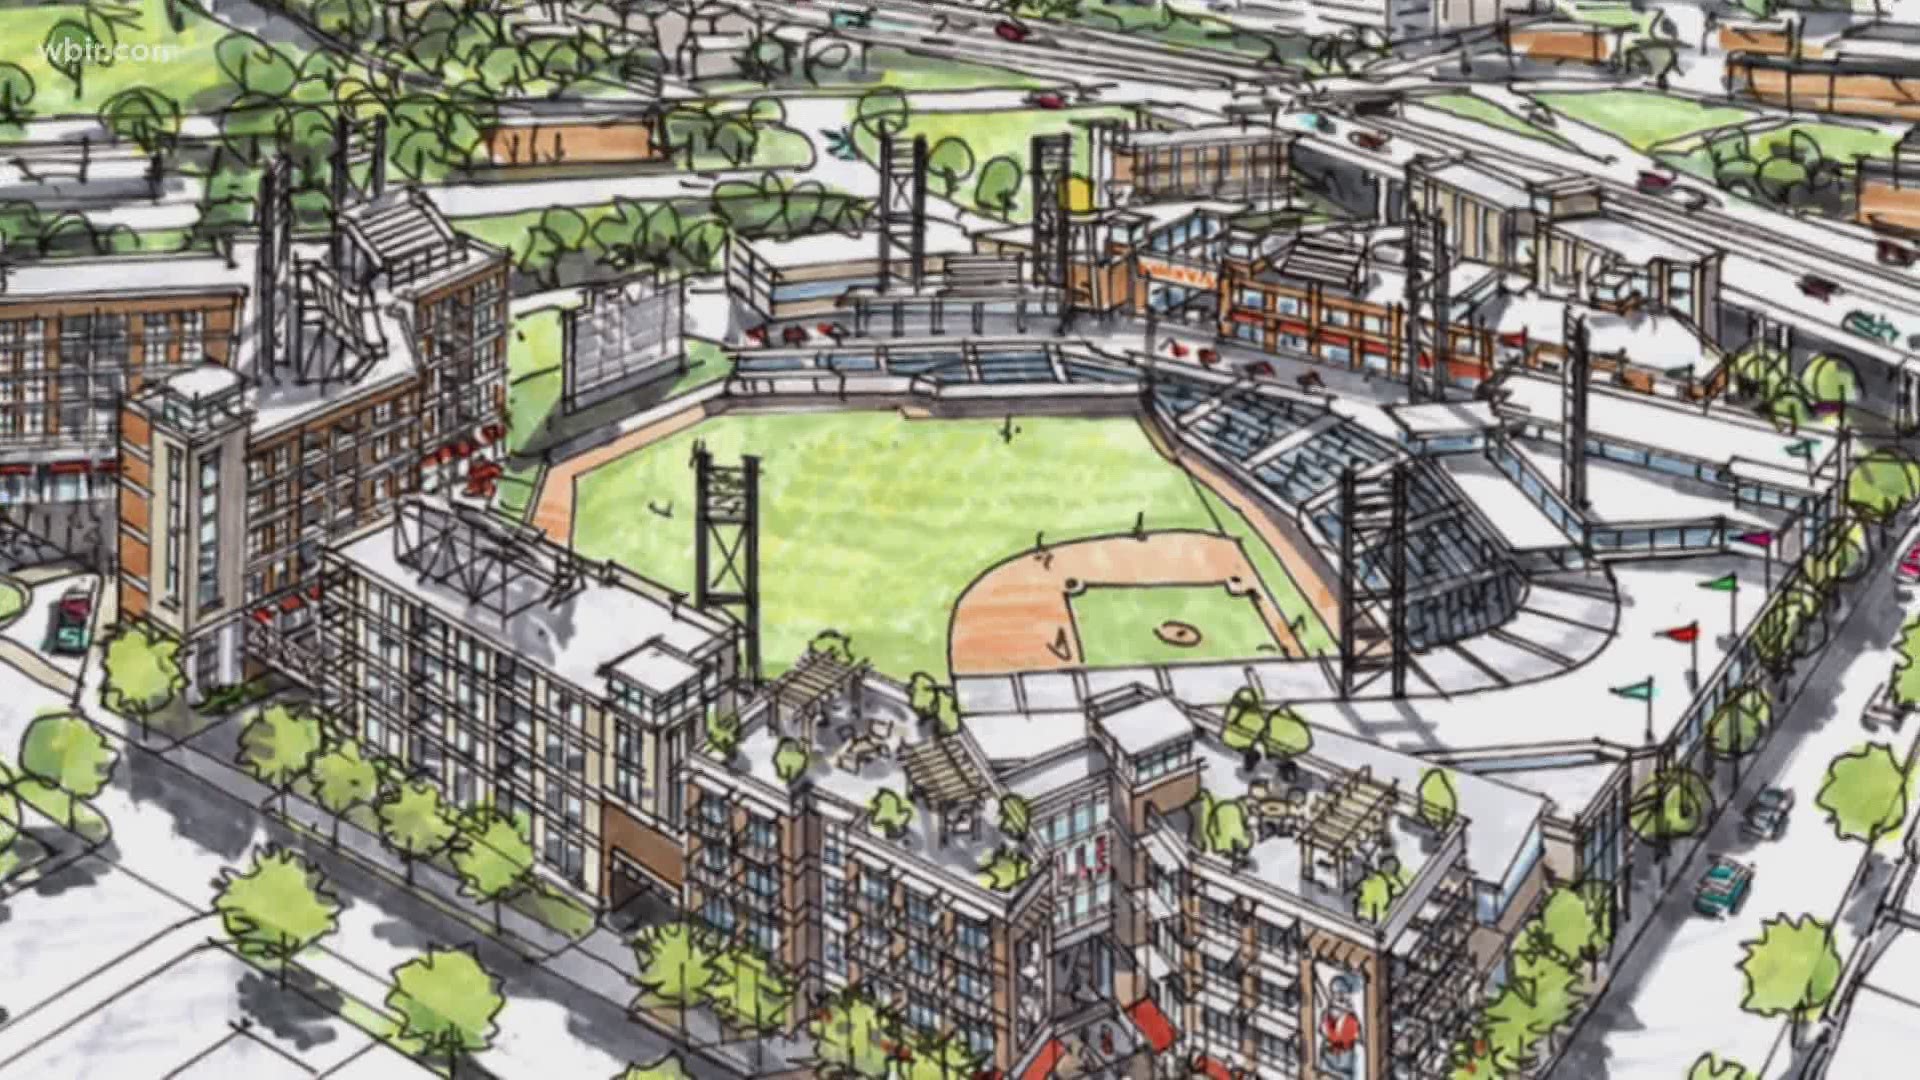 Sports fans and skeptics will get a chance to learn more about the proposed $65 million dollar stadium during a block party along Jackson Avenue.